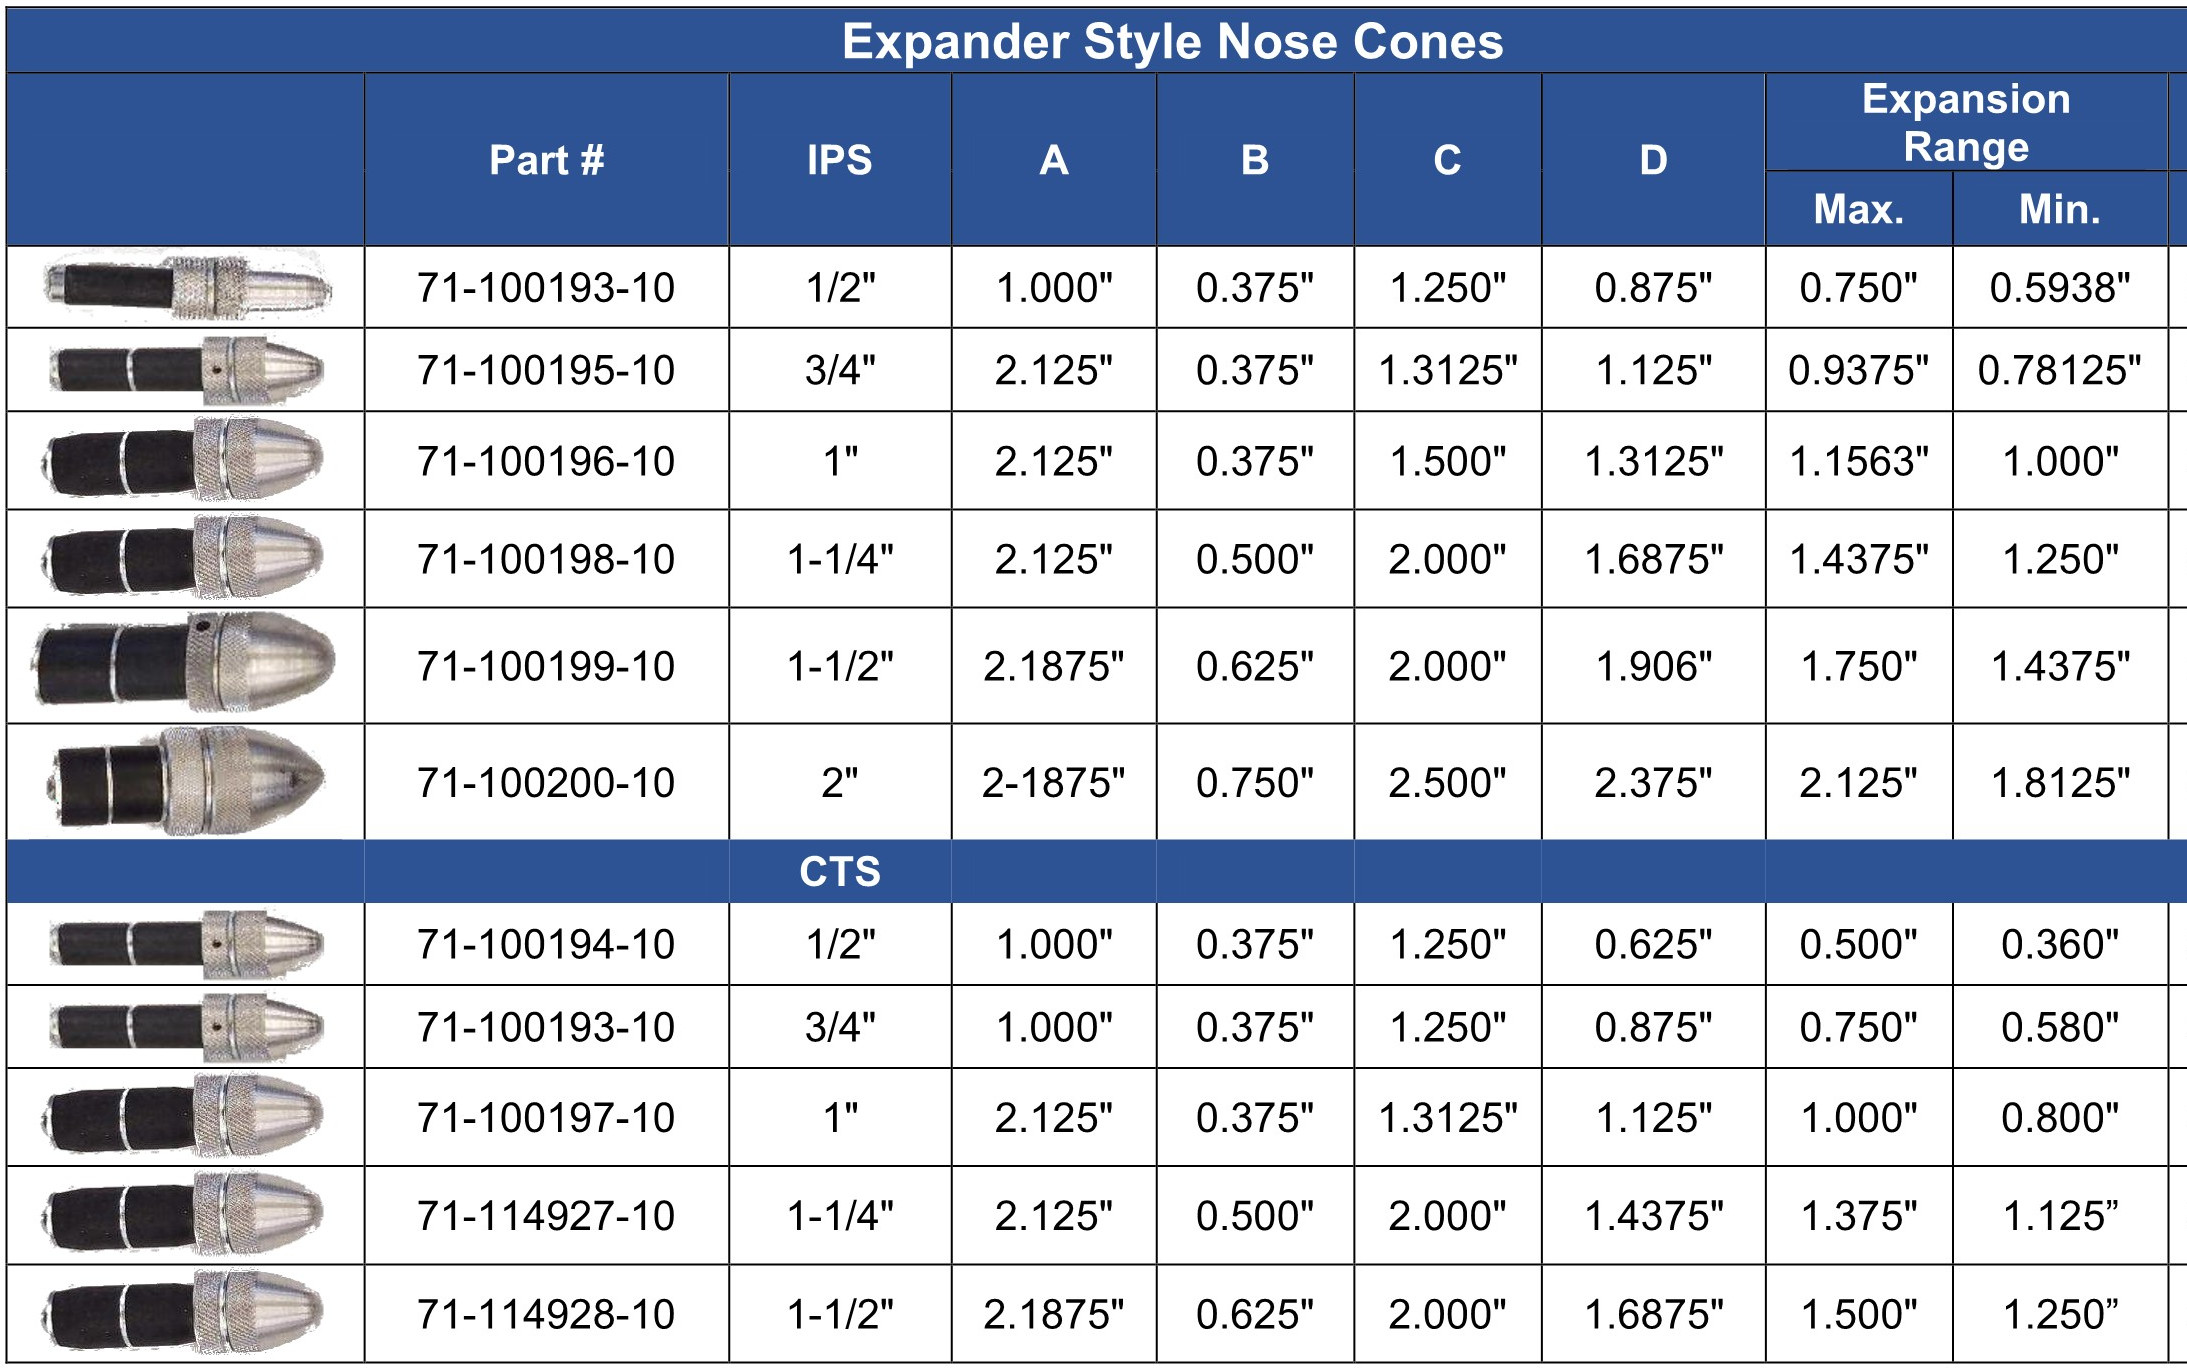 Expander Style Nose Cones Price Sheet 2021_1